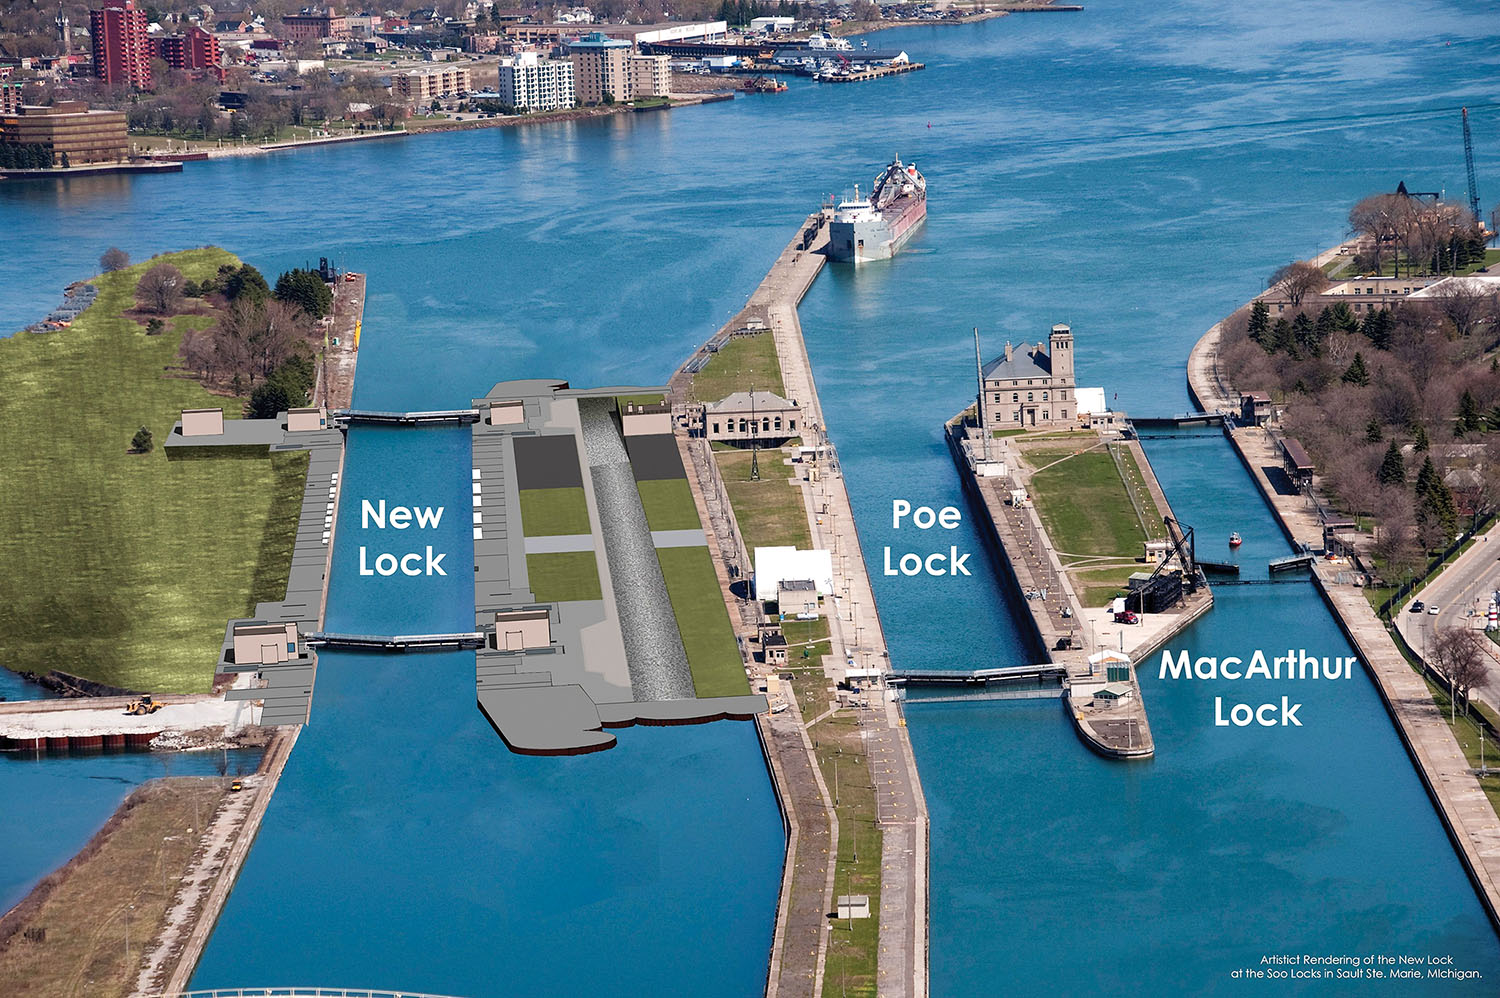 Artistic rendering depicts how the Soo Locks will look once the New Lock at the Soo is complete in Sault Ste. Marie, Mich. (Courtesy of Detroit Engineer District)